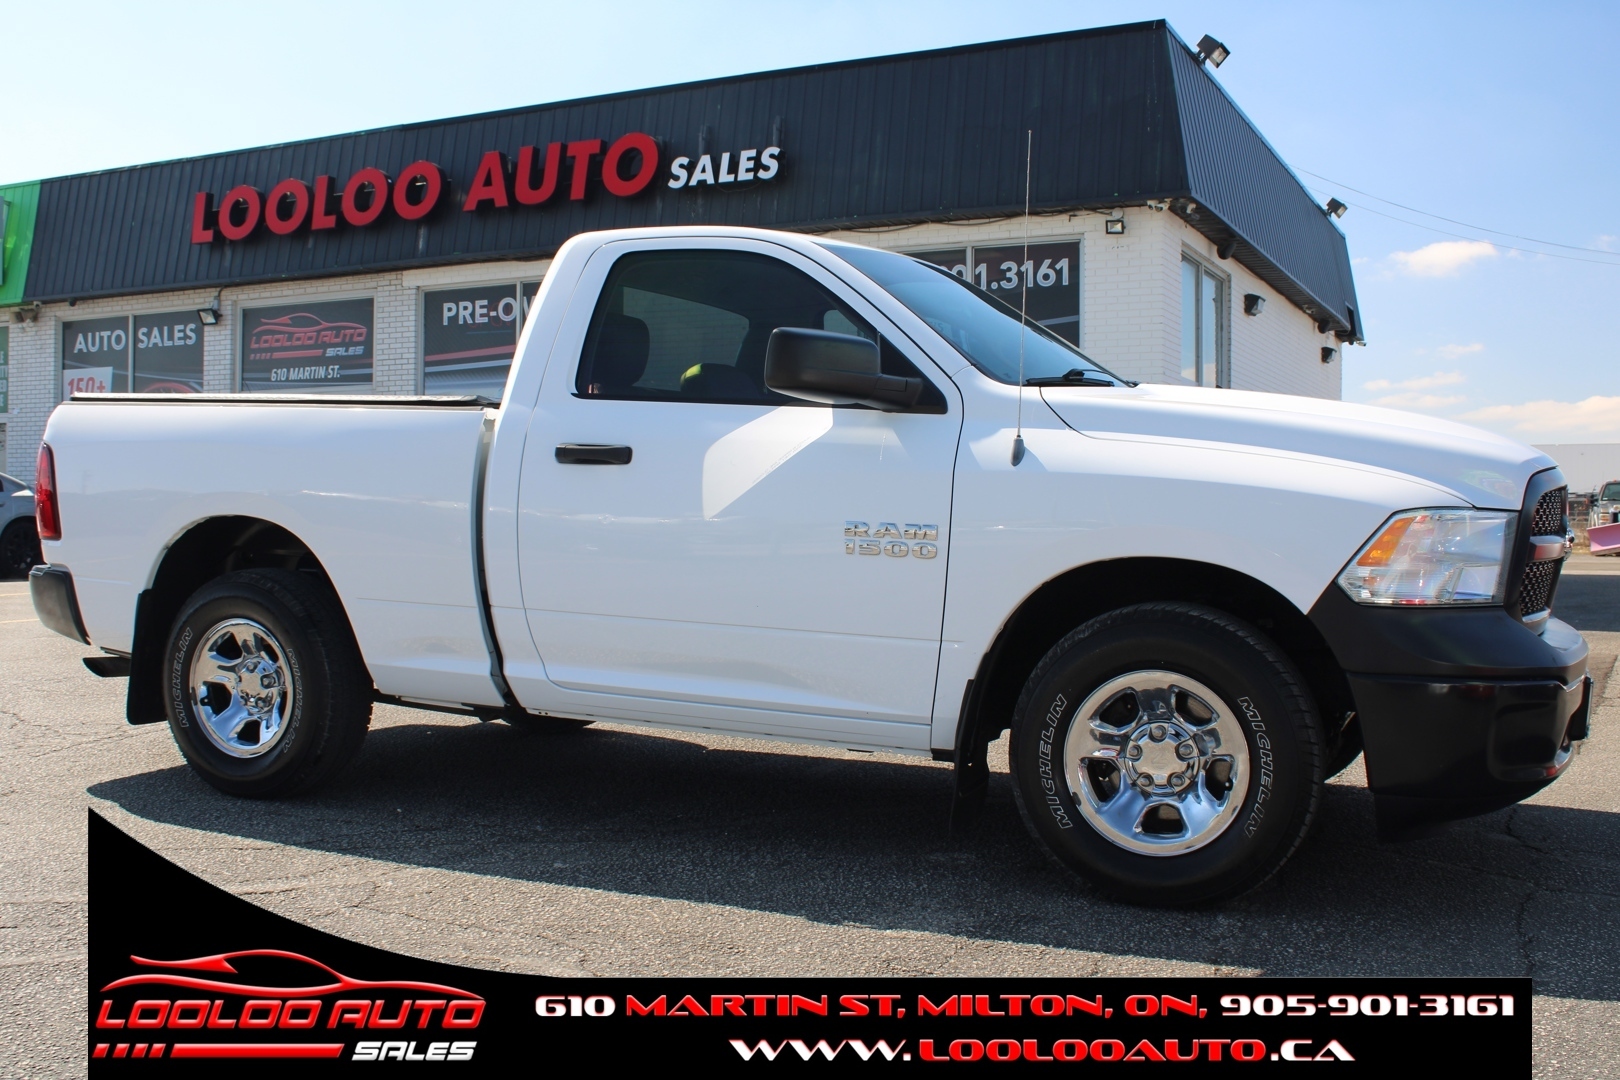 2013 Ram 1500 Regular Cab | SAFETY CERTIFIED | VERY CLEAN TRUCK